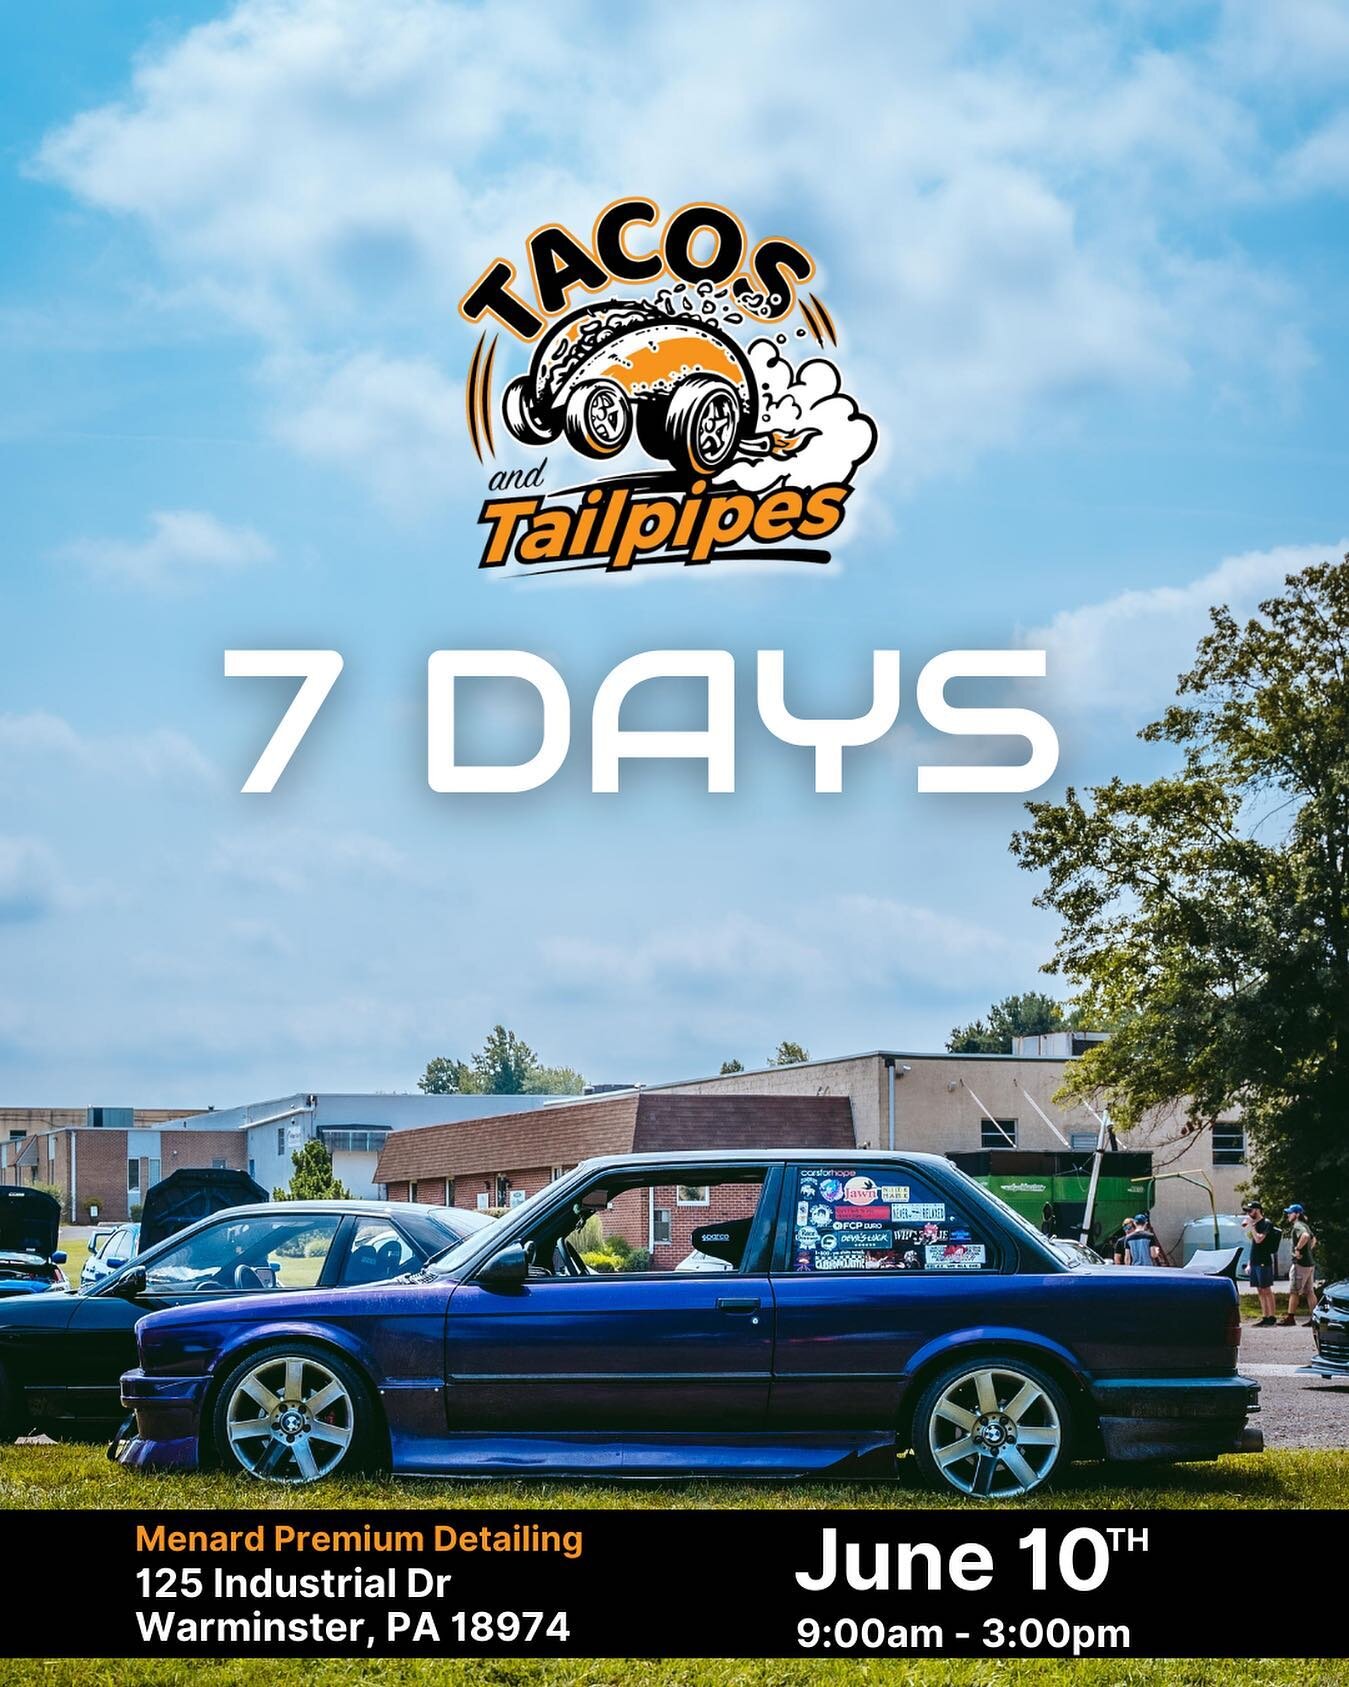 7 DAYS🌮💨
Tacos and tailpipes is only a week away!!
.
ALL ARE WELCOME! We can&rsquo;t wait to see you there!
.
🌮 from #taqueriaaguila 
🍻 from @warwickfarmbrewing 
🍹from @klyrrum 
🍕from @ardanafoodanddrink 
.
🎤 Performances by 
@mattfreedmanmusi